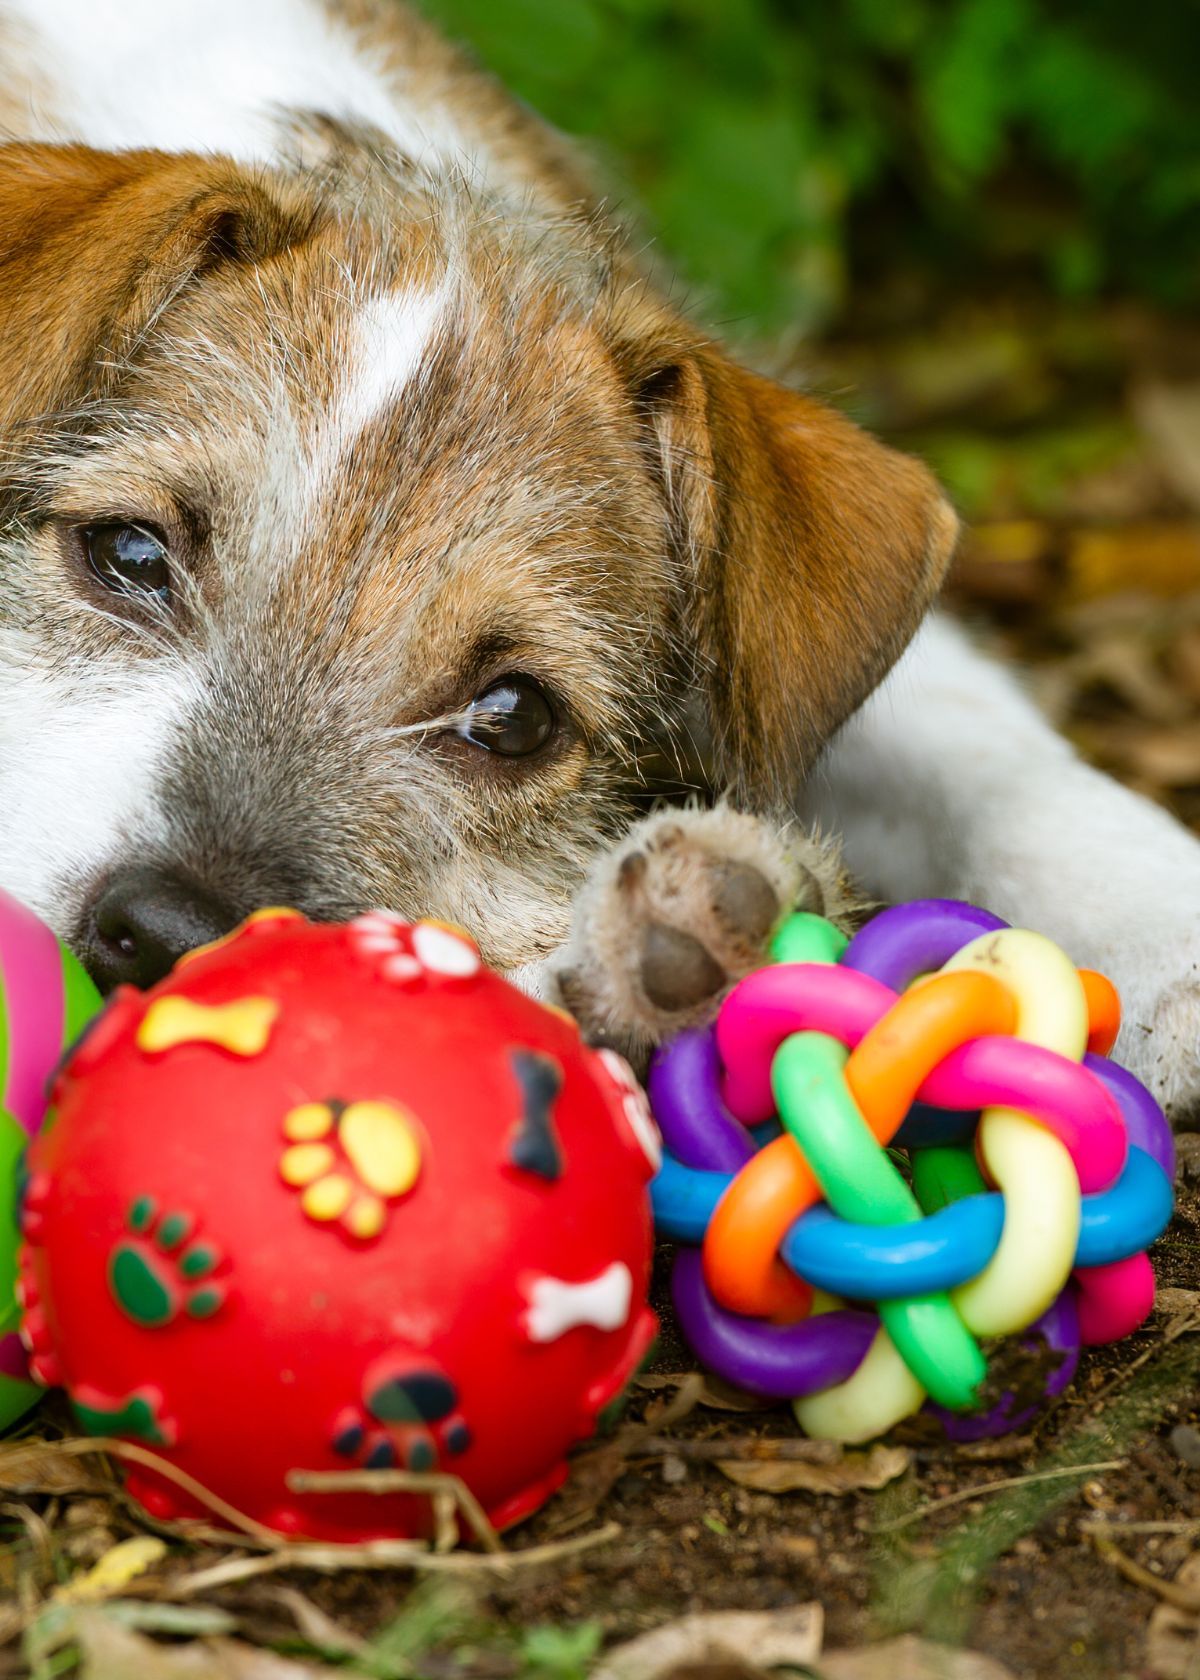 Get Ready to Make Fido’s Day with Water Dog Toys from Amazon!